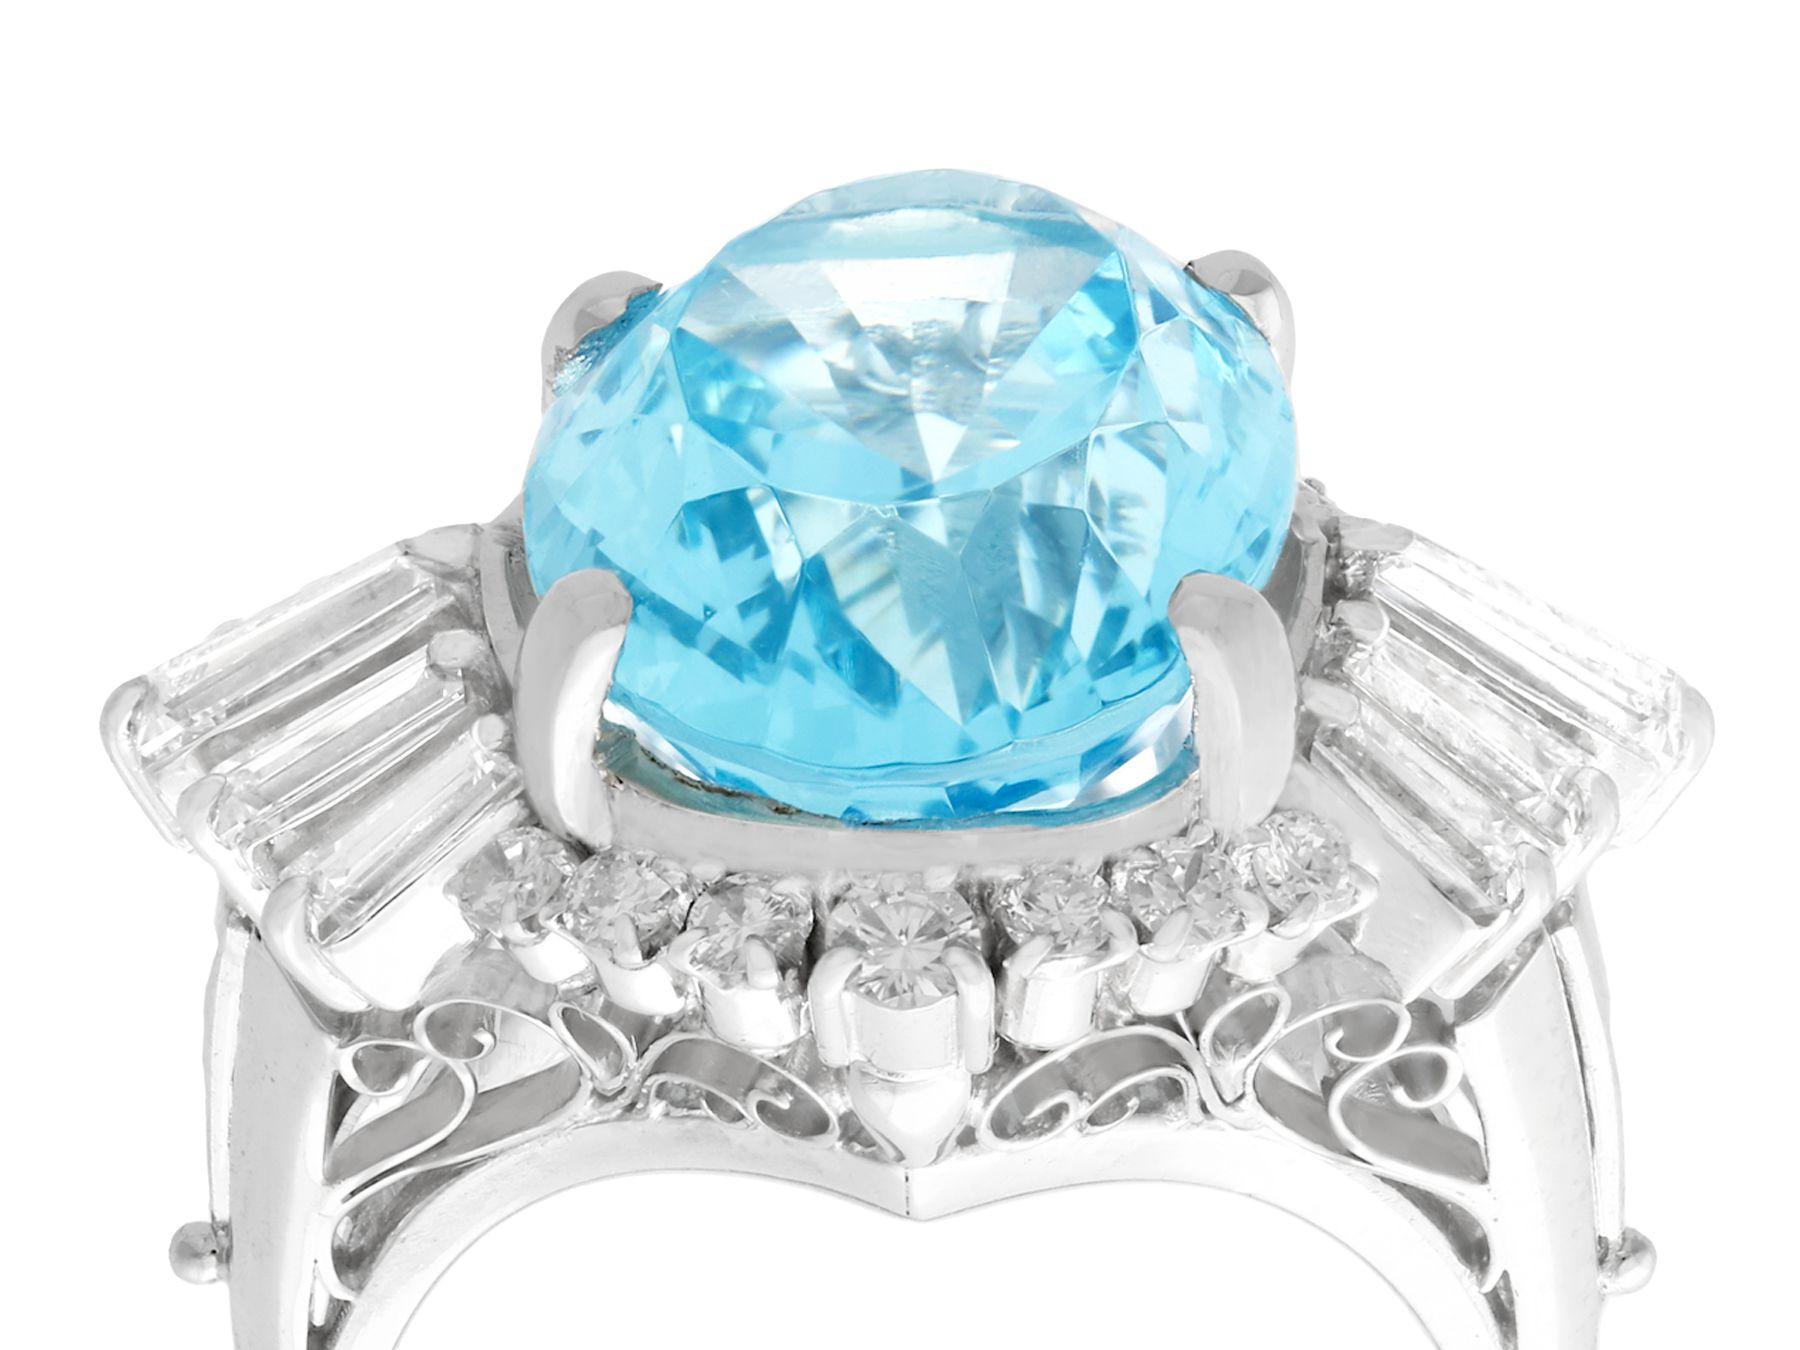 A stunning vintage 1990s 7.75 carat aquamarine and 1.65 carat diamond, platinum cocktail ring; part of our diverse gemstone jewelry and estate jewelry collections.

This stunning, fine and impressive vintage aquamarine ring has been crafted in